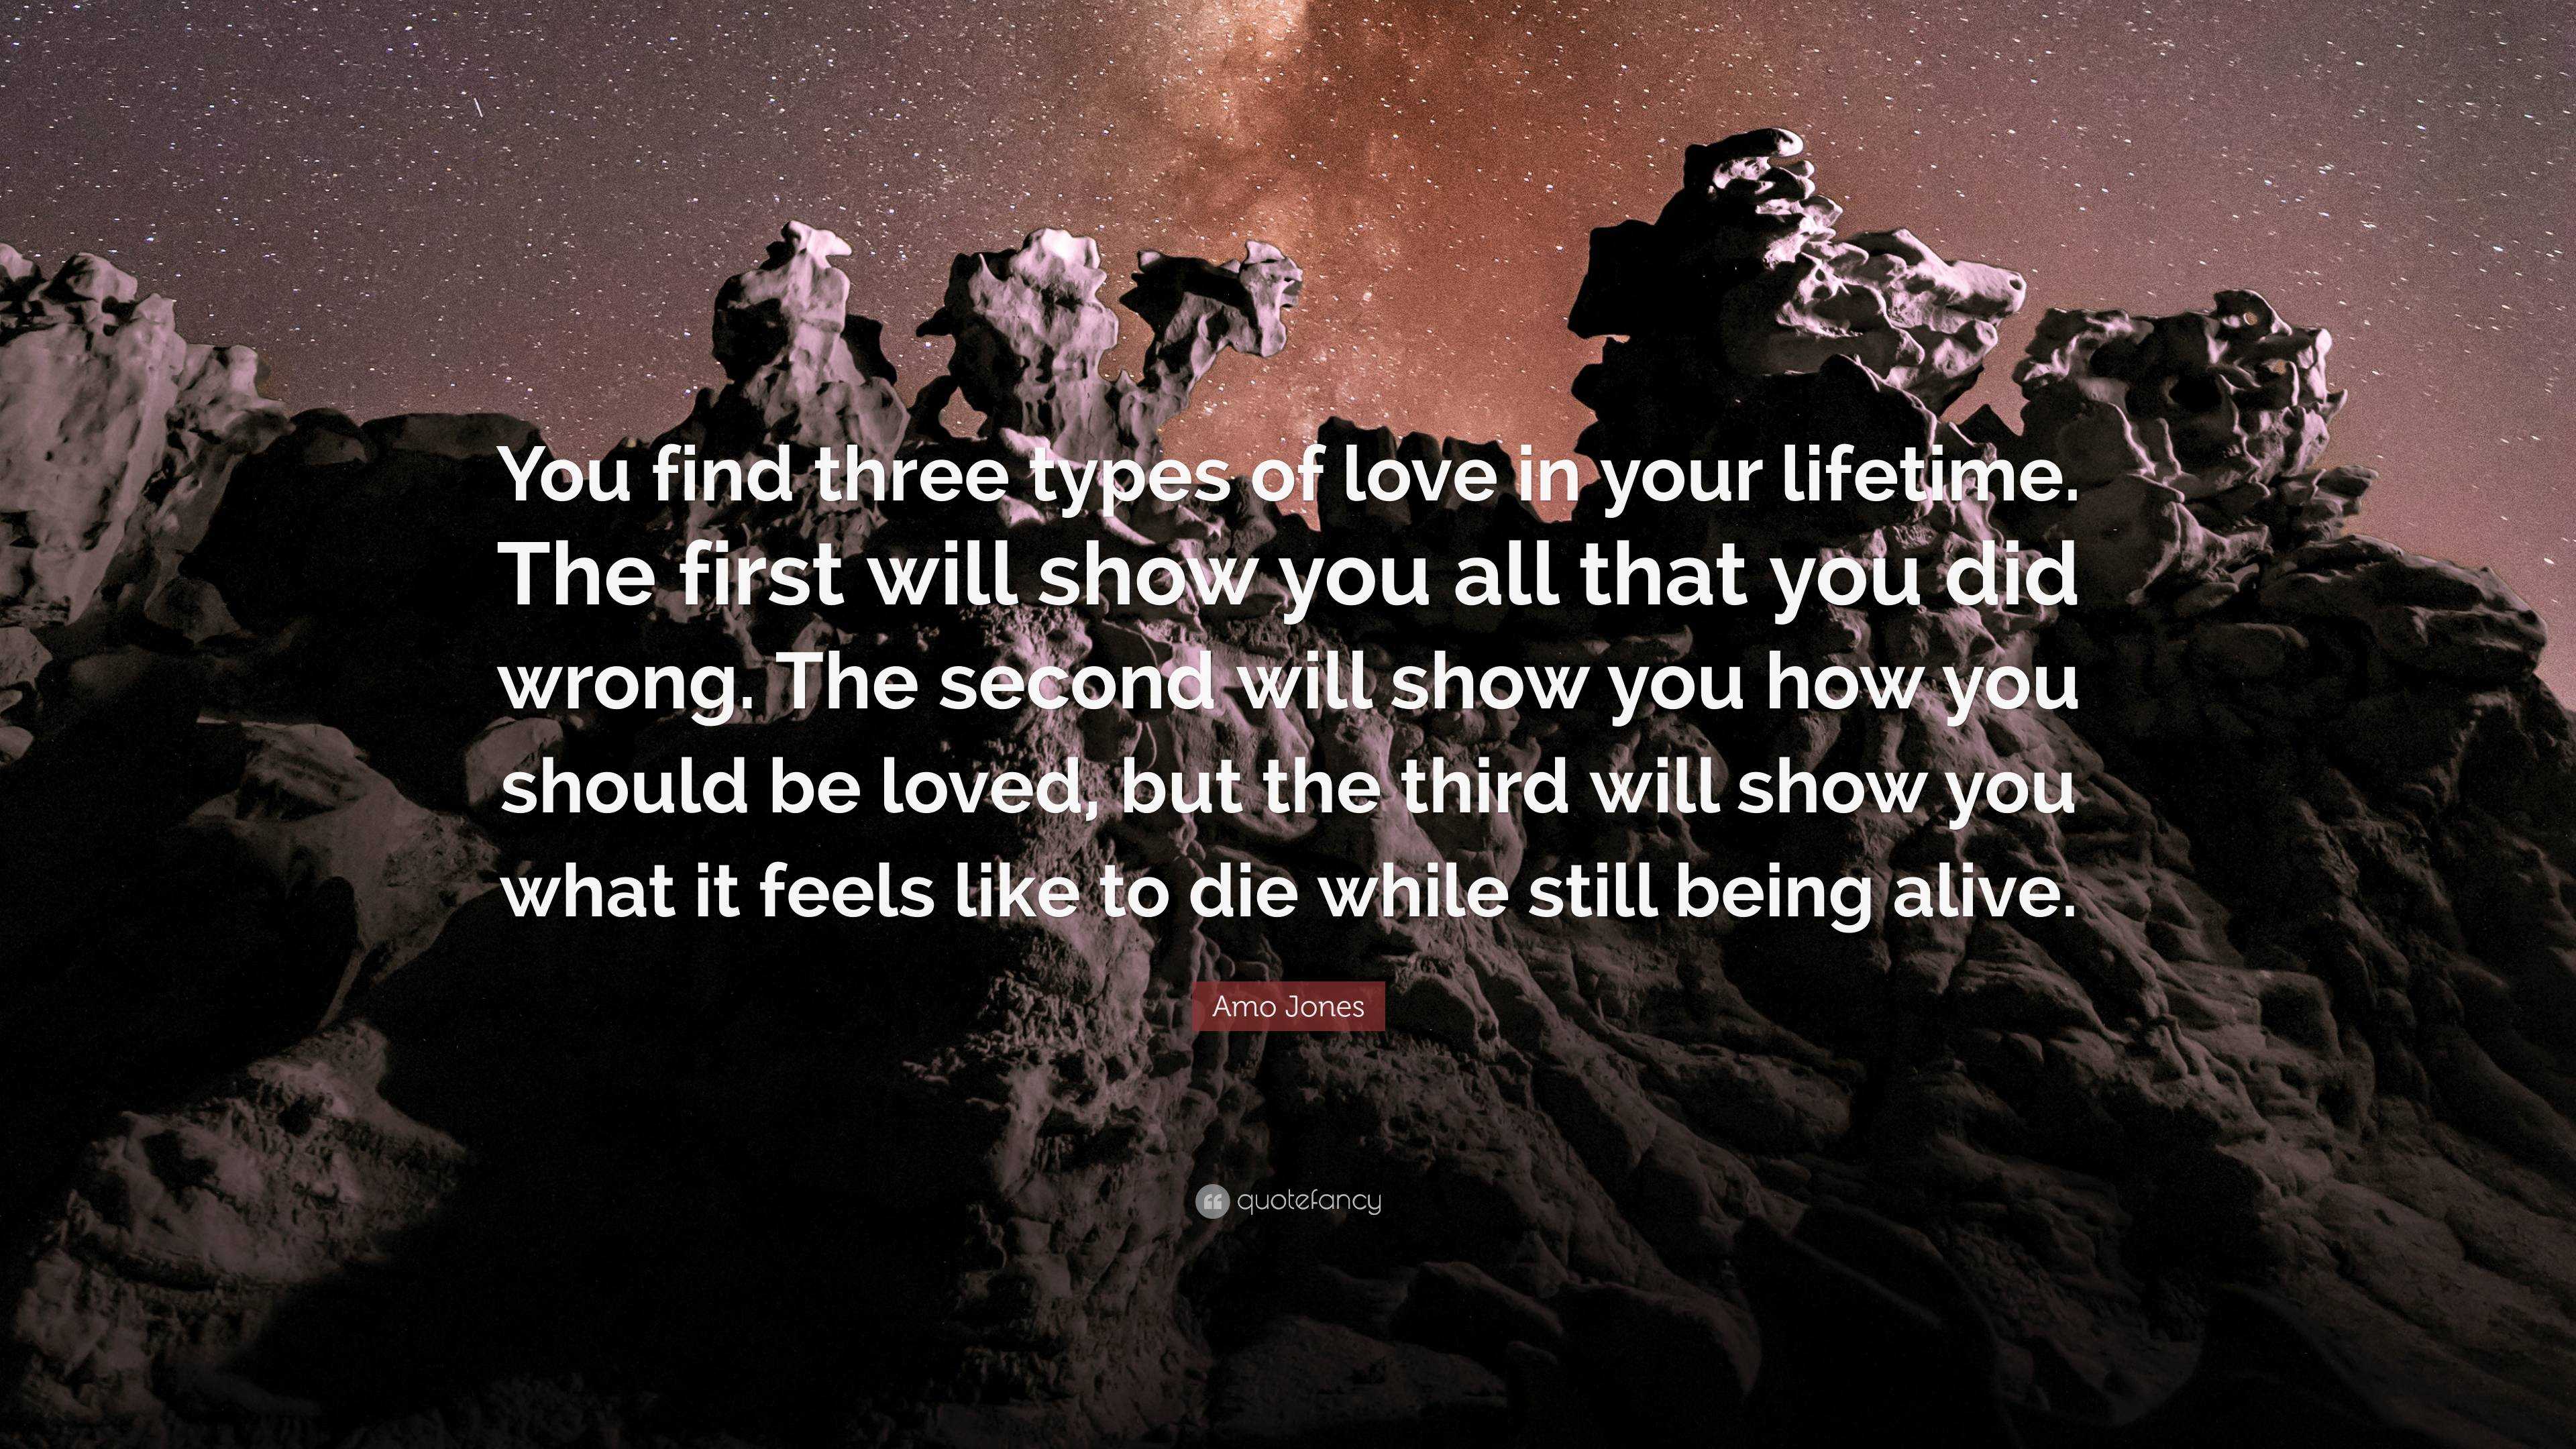 Amo Jones Quote: “You find three types of love in your lifetime